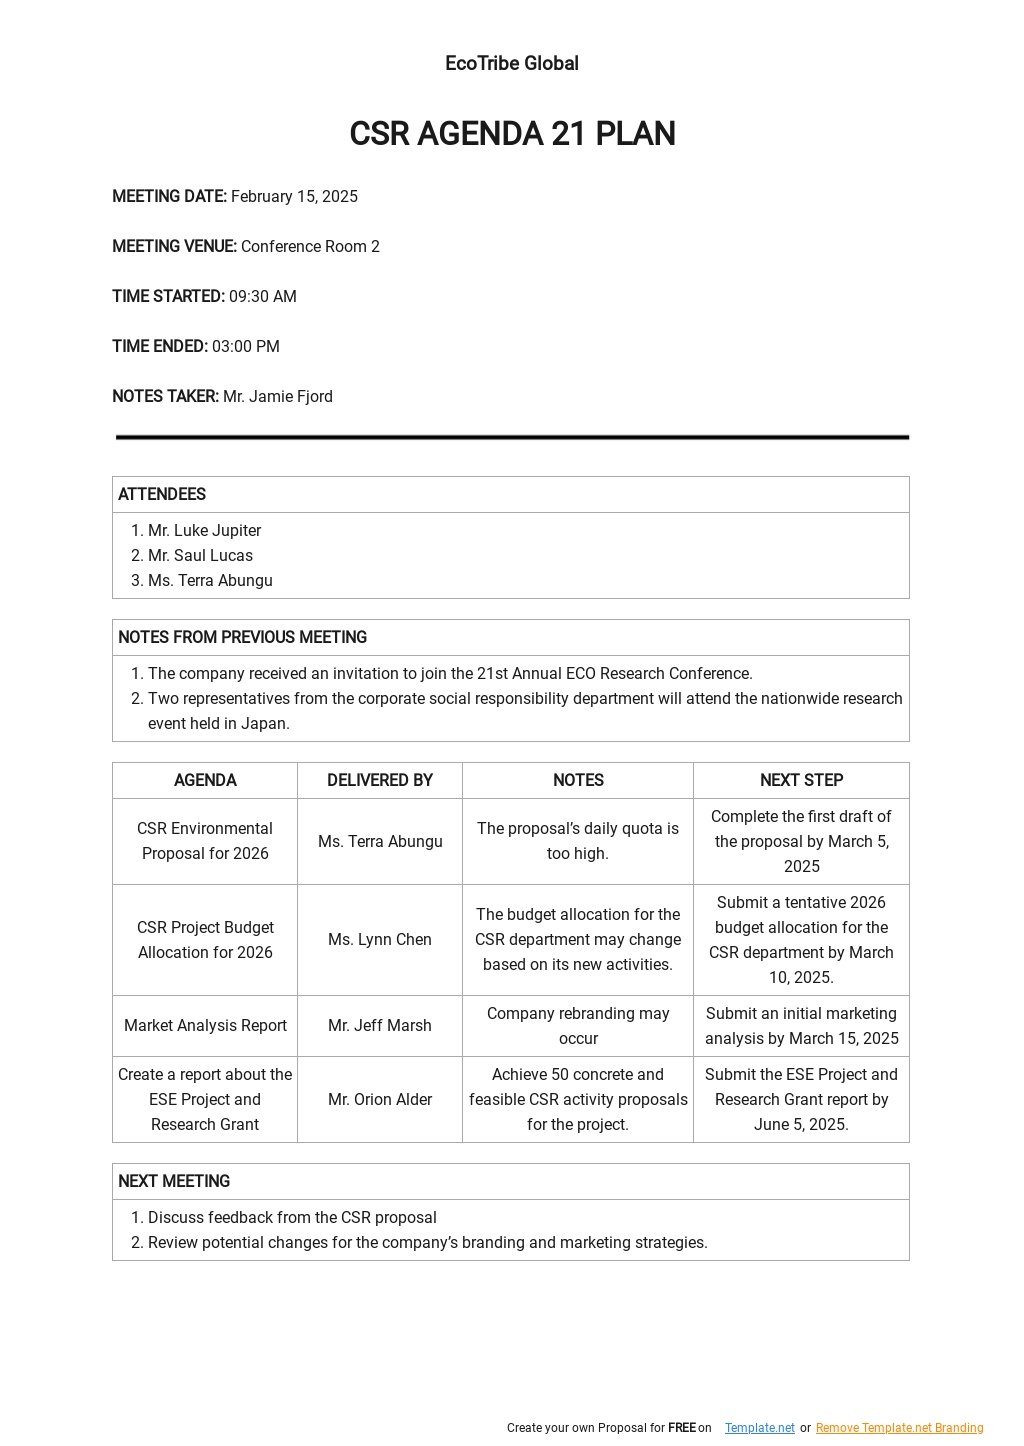 Agenda 21 Plan Template in Word, Google Docs, Apple Pages